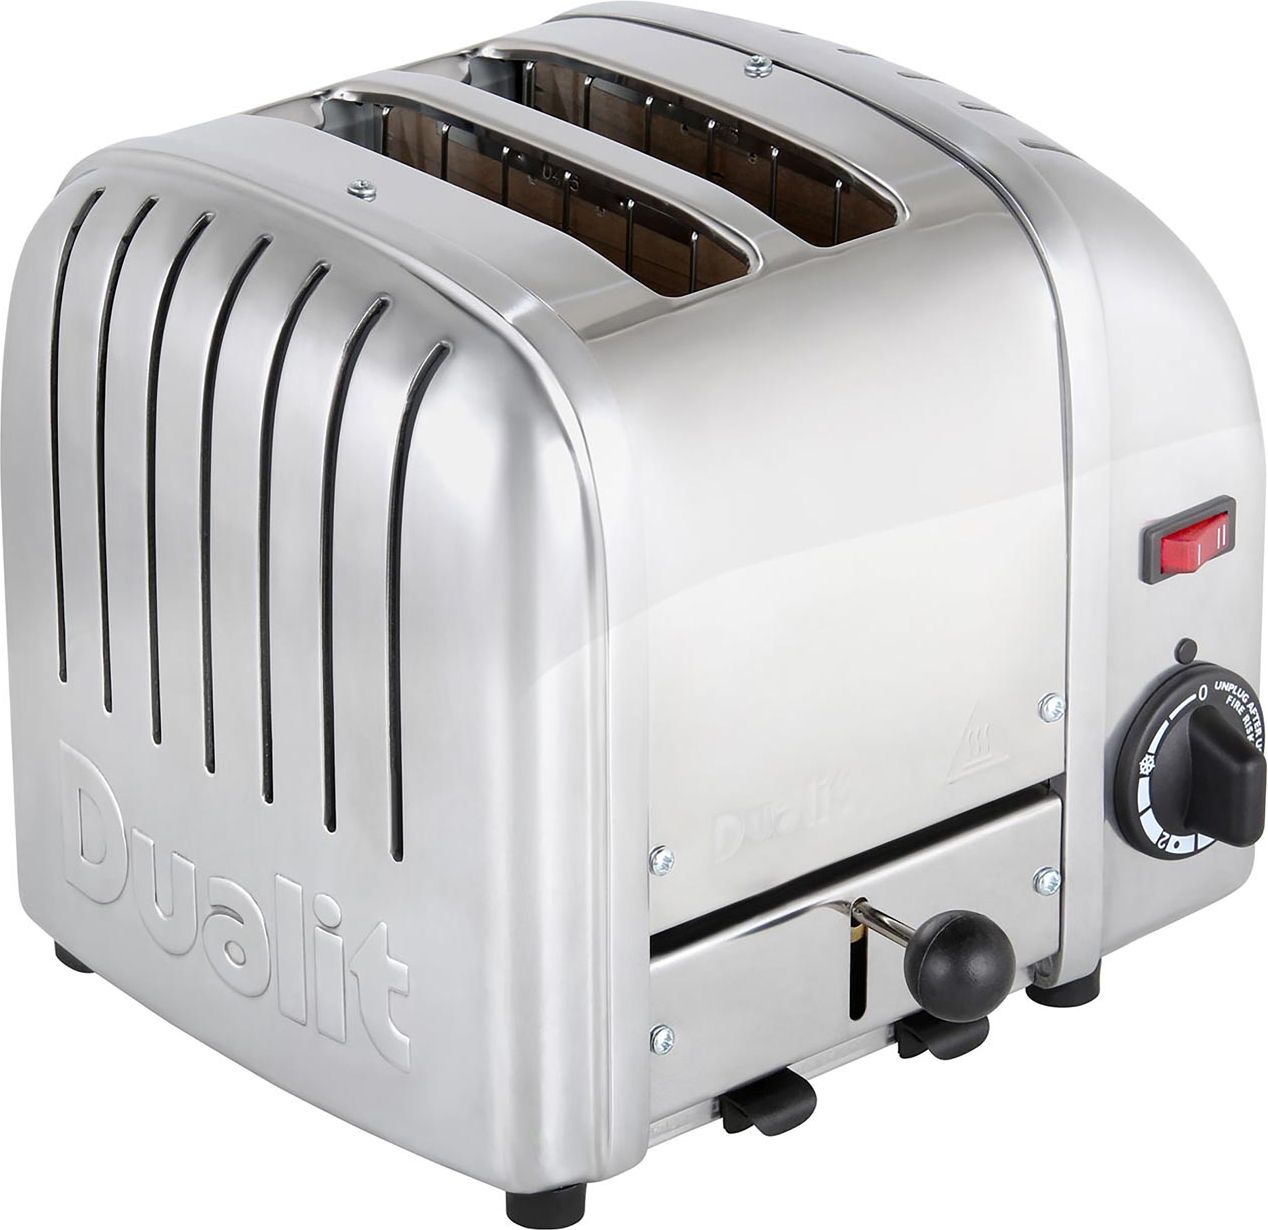 Dualit Classic Vario 20245 2 Slice Toaster - Stainless Steel, Stainless Steel